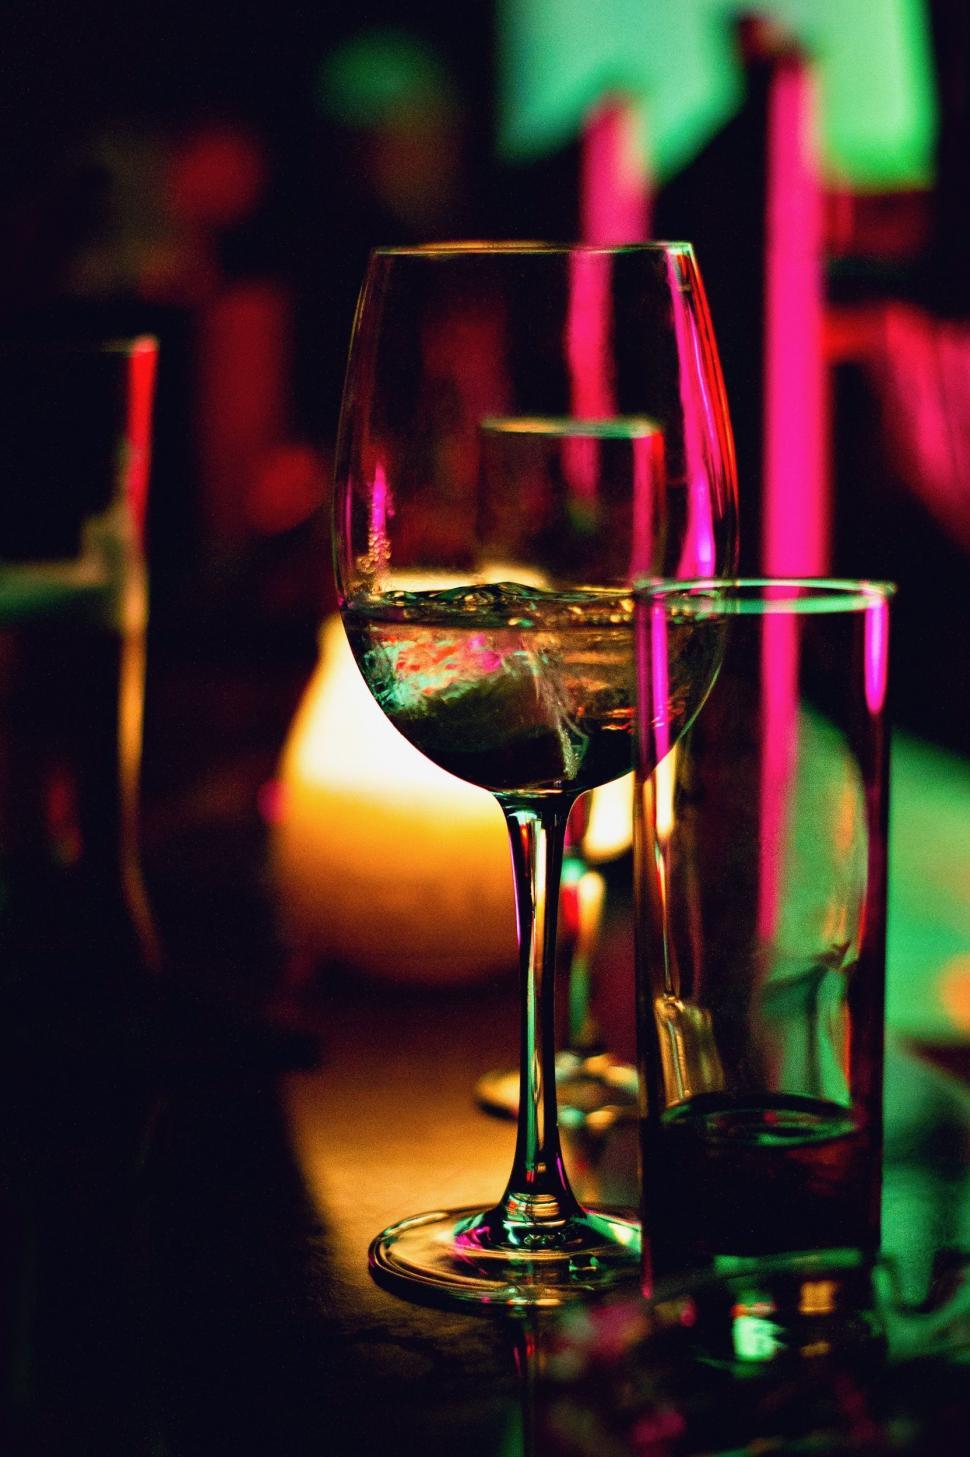 Free Image of Glasses of Wine on Table 